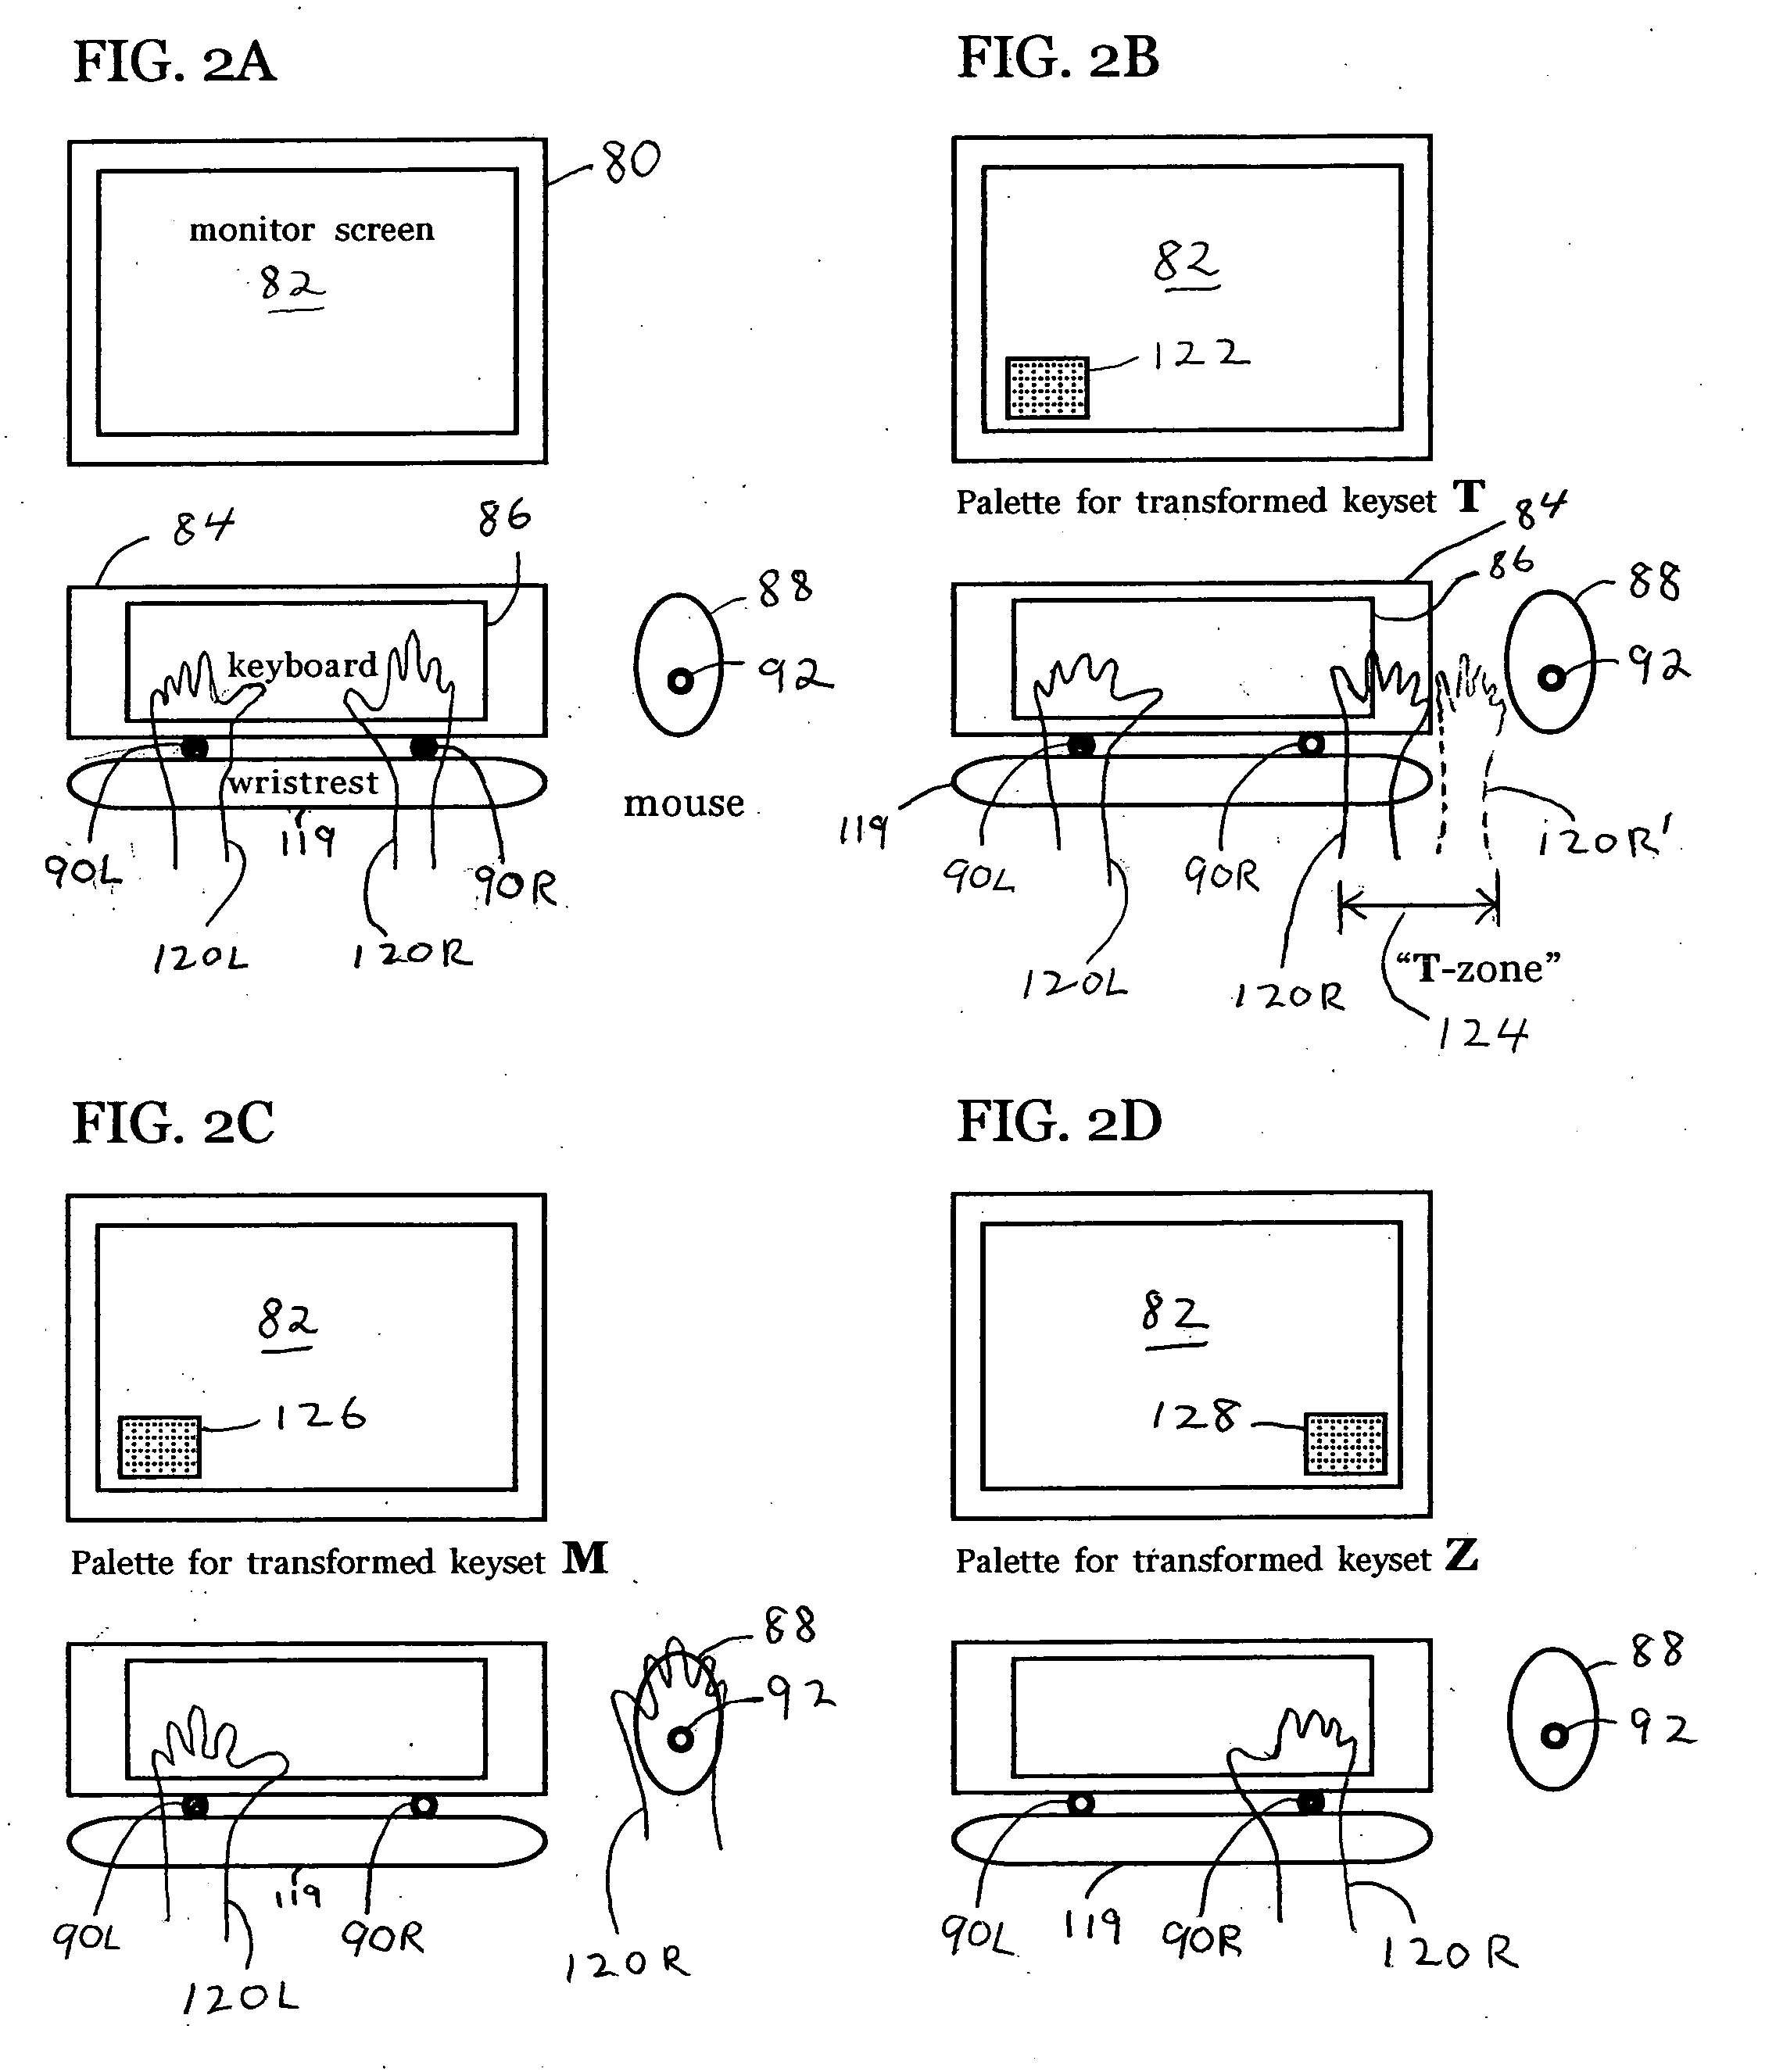 Method and apparatus for automatically transforming functions of computer keyboard keys and pointing devices by detection of hand location